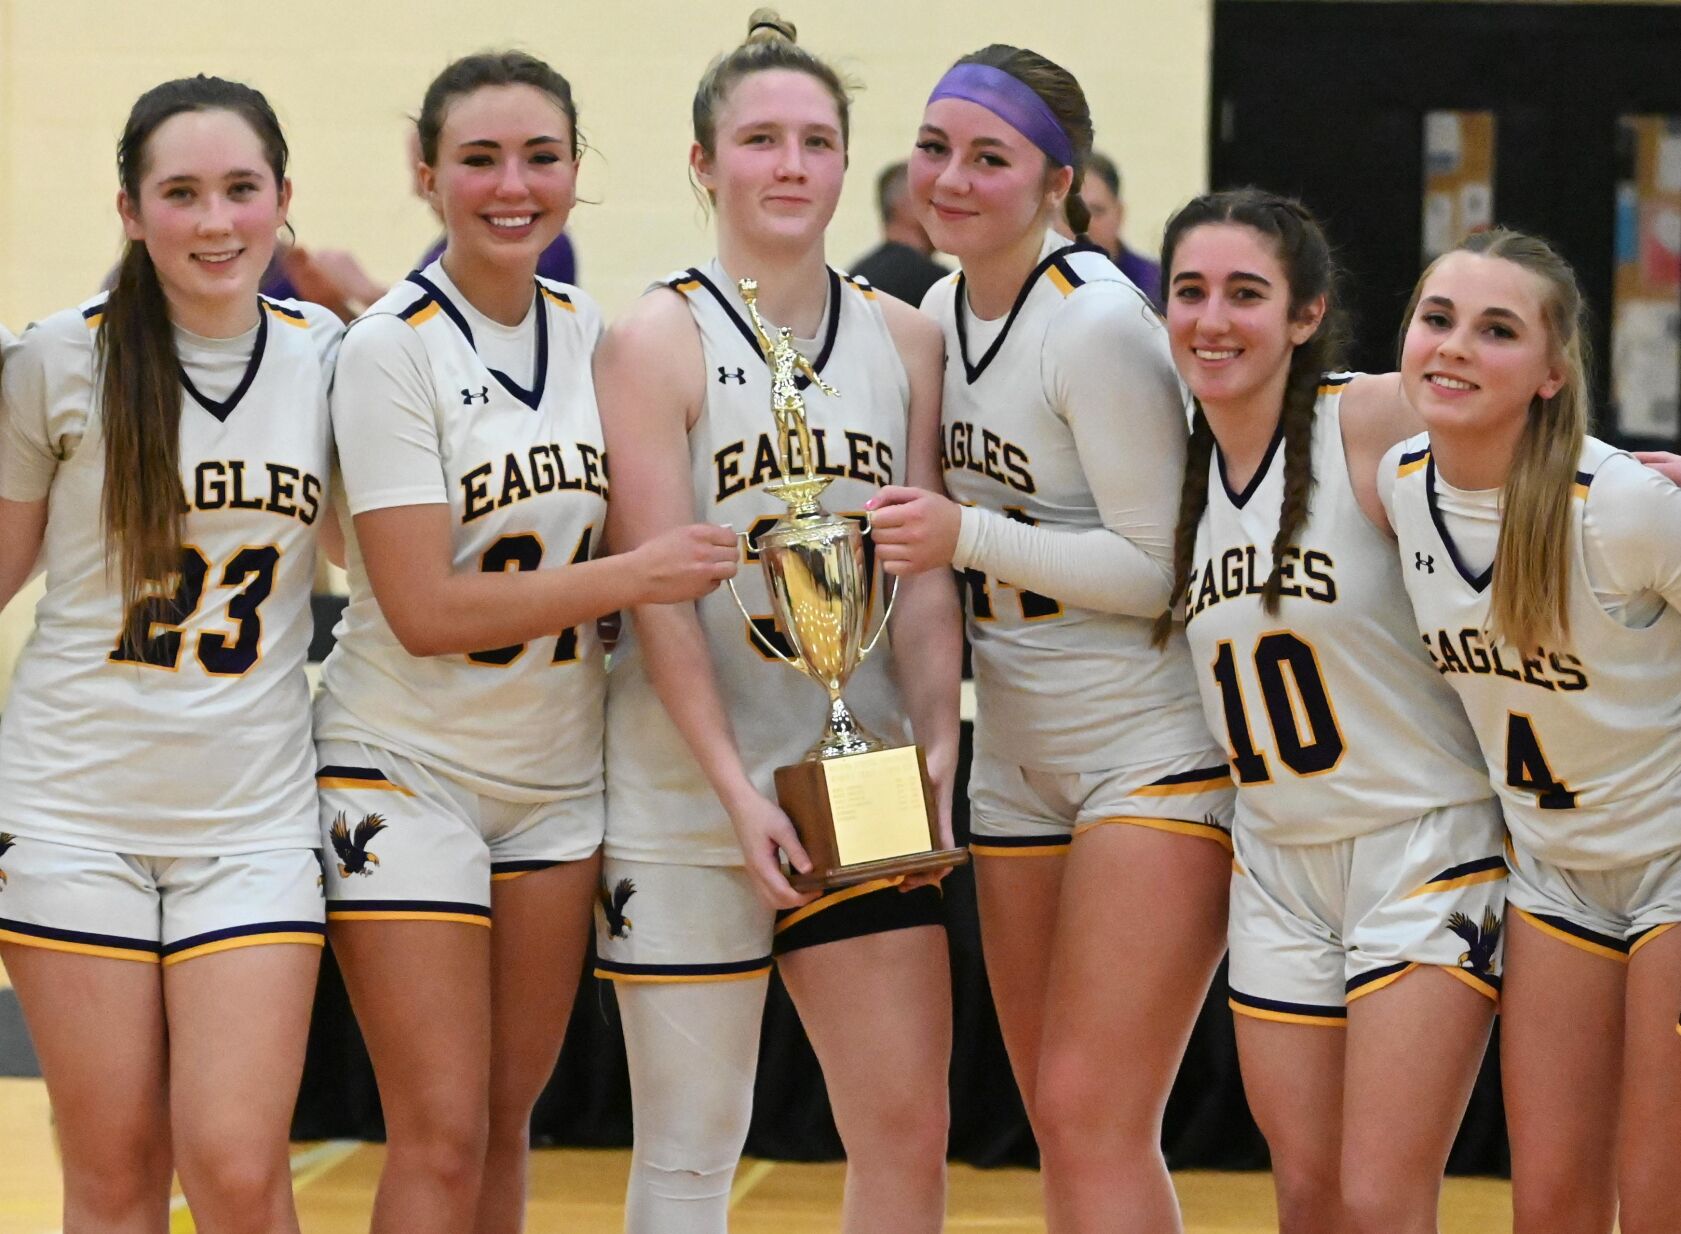 Duanesburg Dominates Berne-Knox-Westerlo to Reach Section 2 Class C Girls’ Basketball Championship